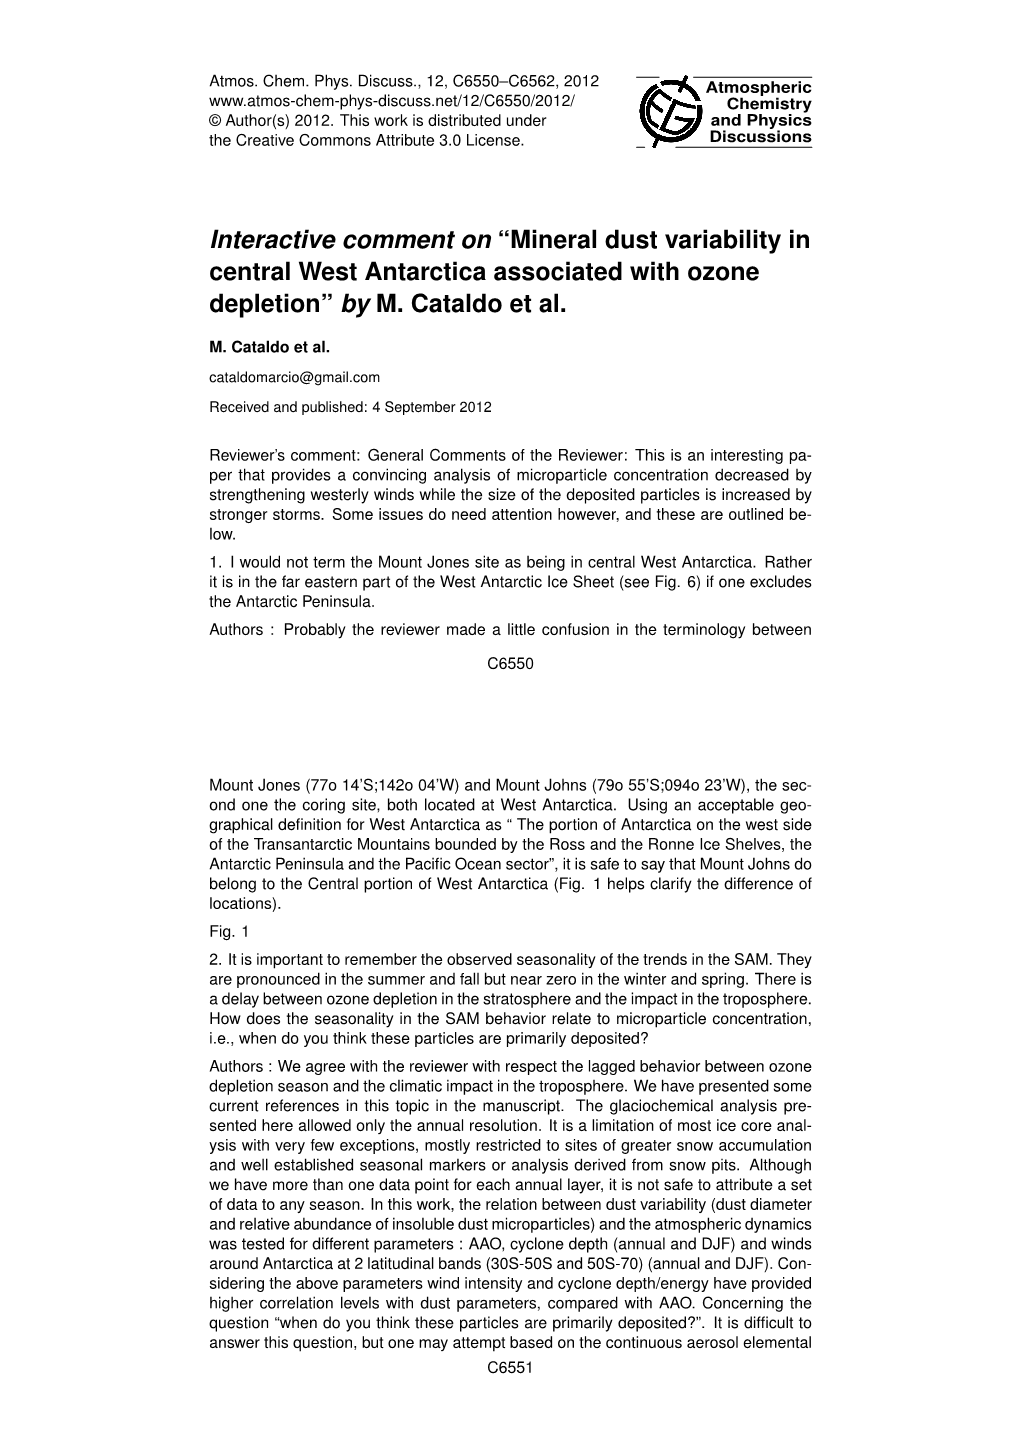 Mineral Dust Variability in Central West Antarctica Associated with Ozone Depletion” by M